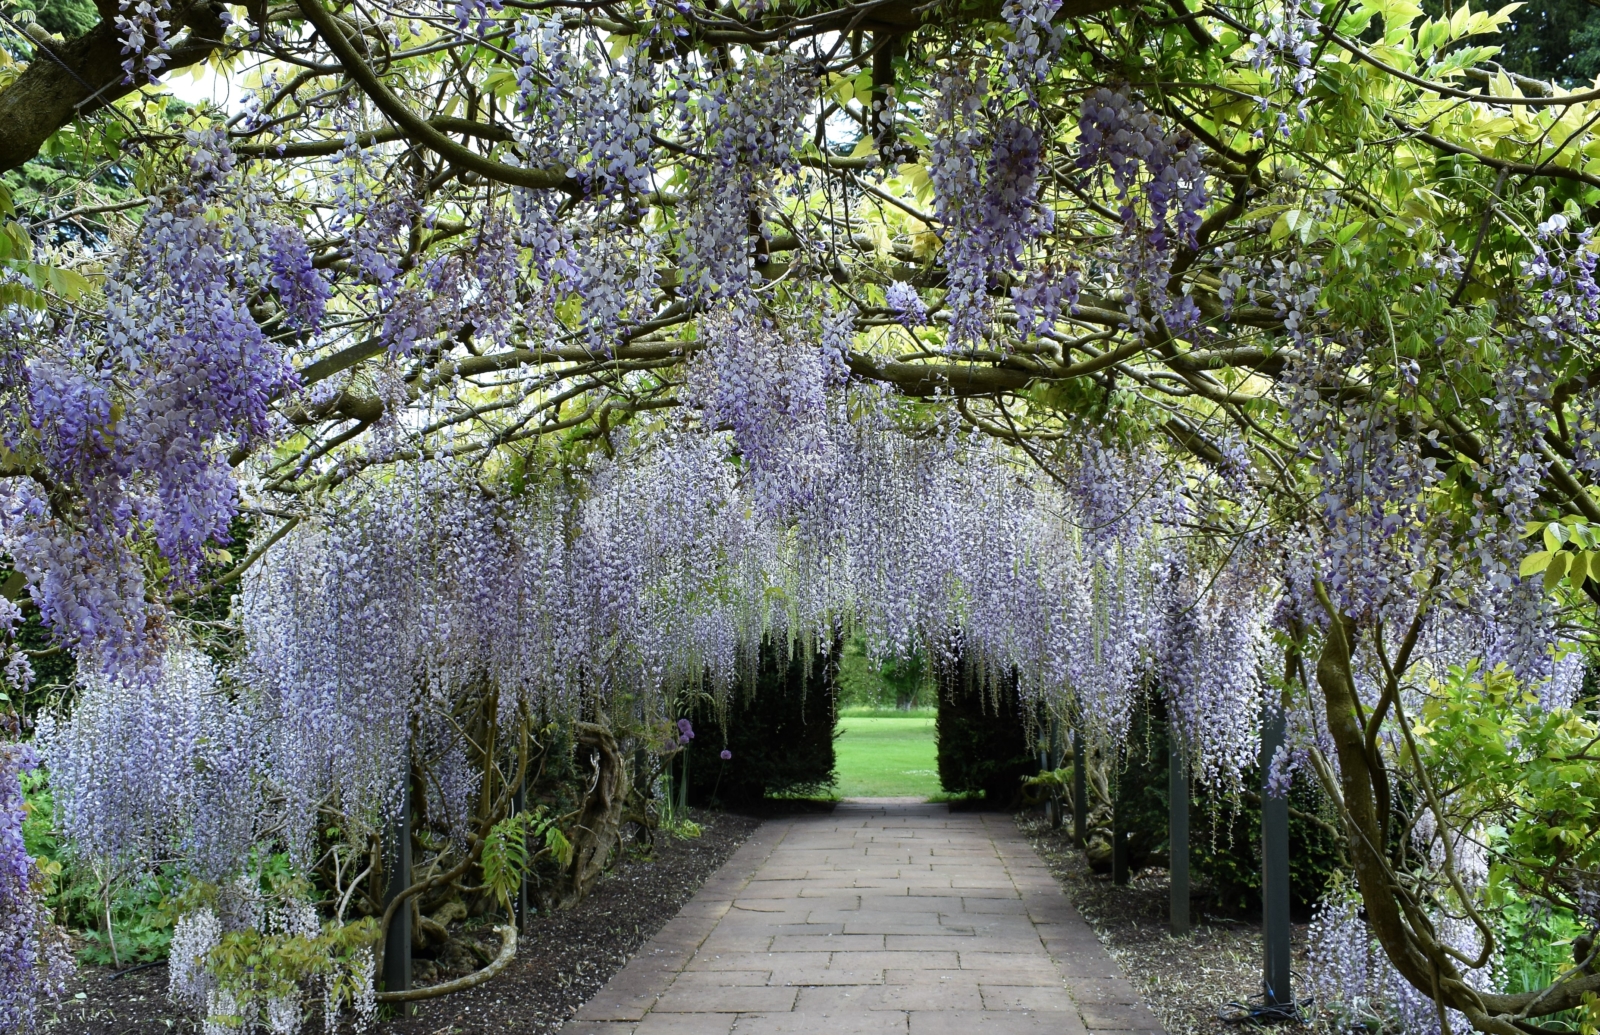 central path with wisteria arch over the top